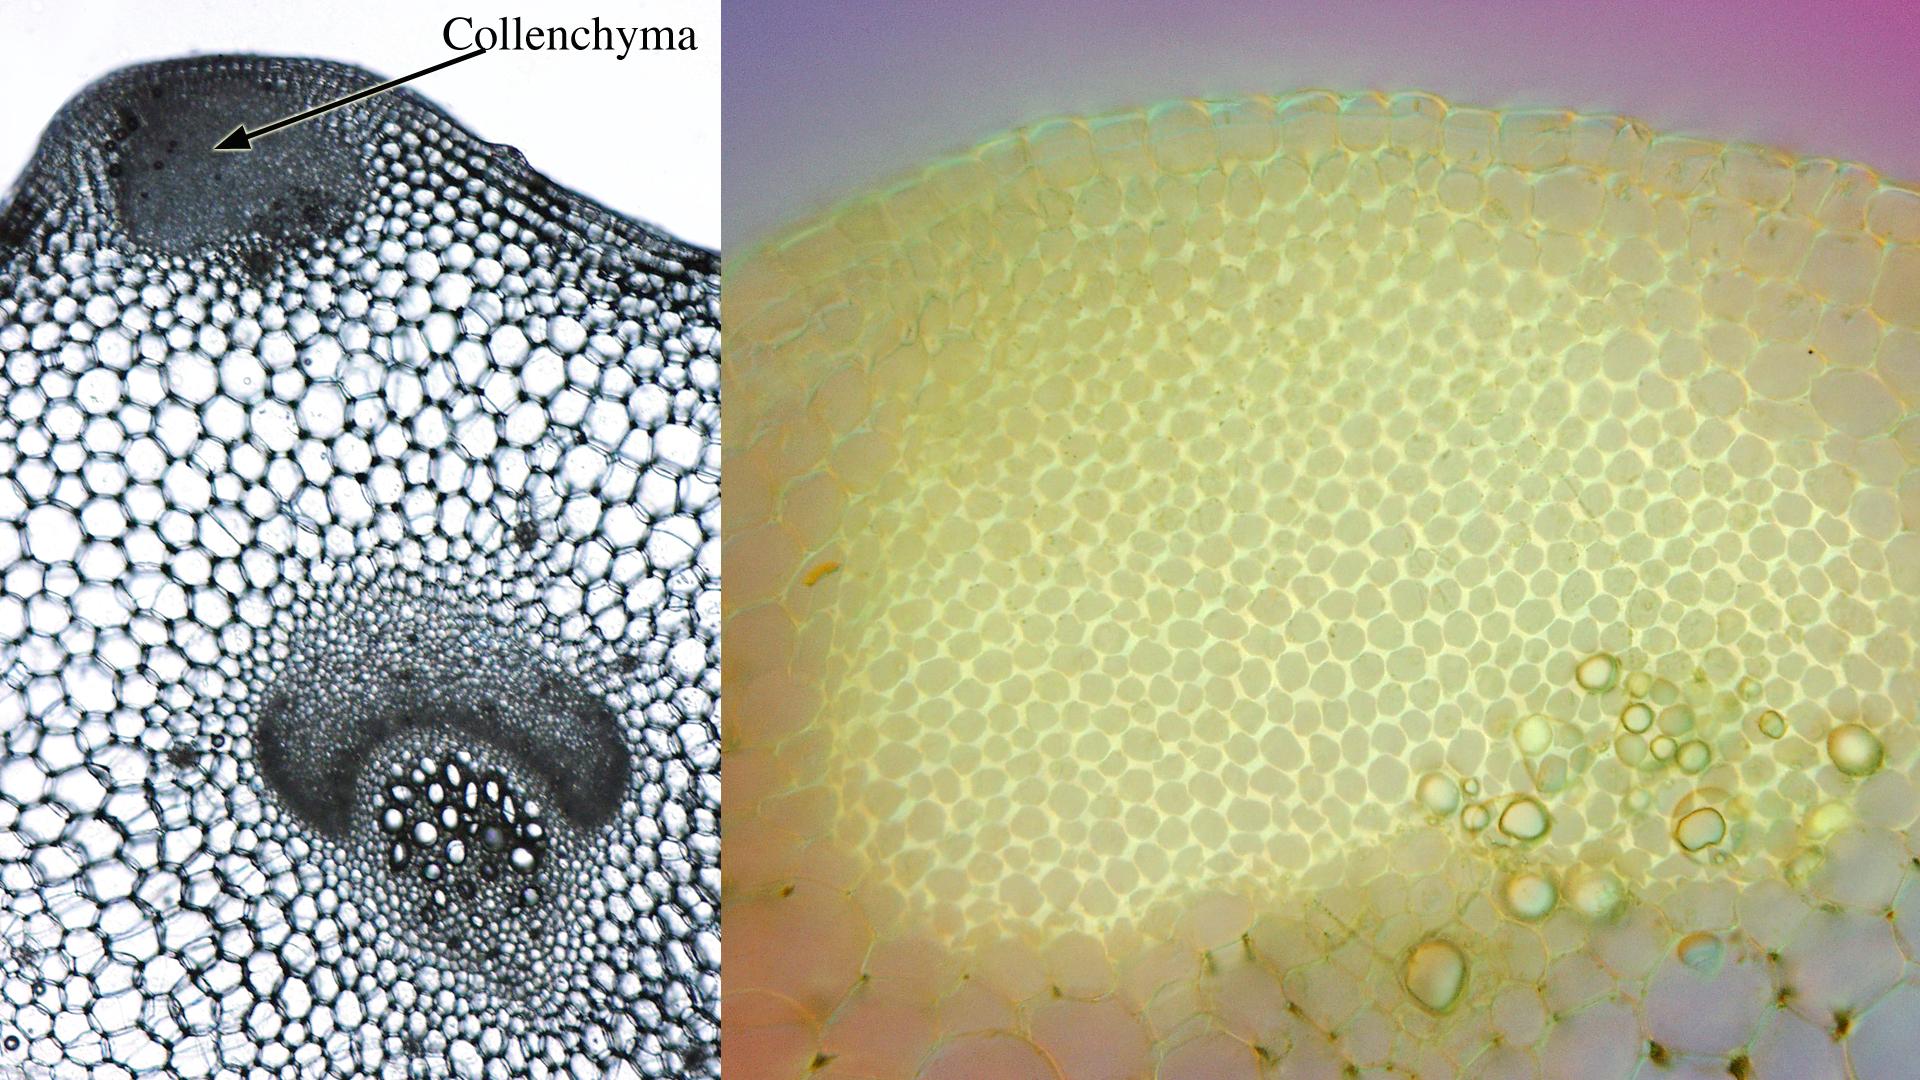 Composite of two views of cross sections of celery petiole at different magnifications